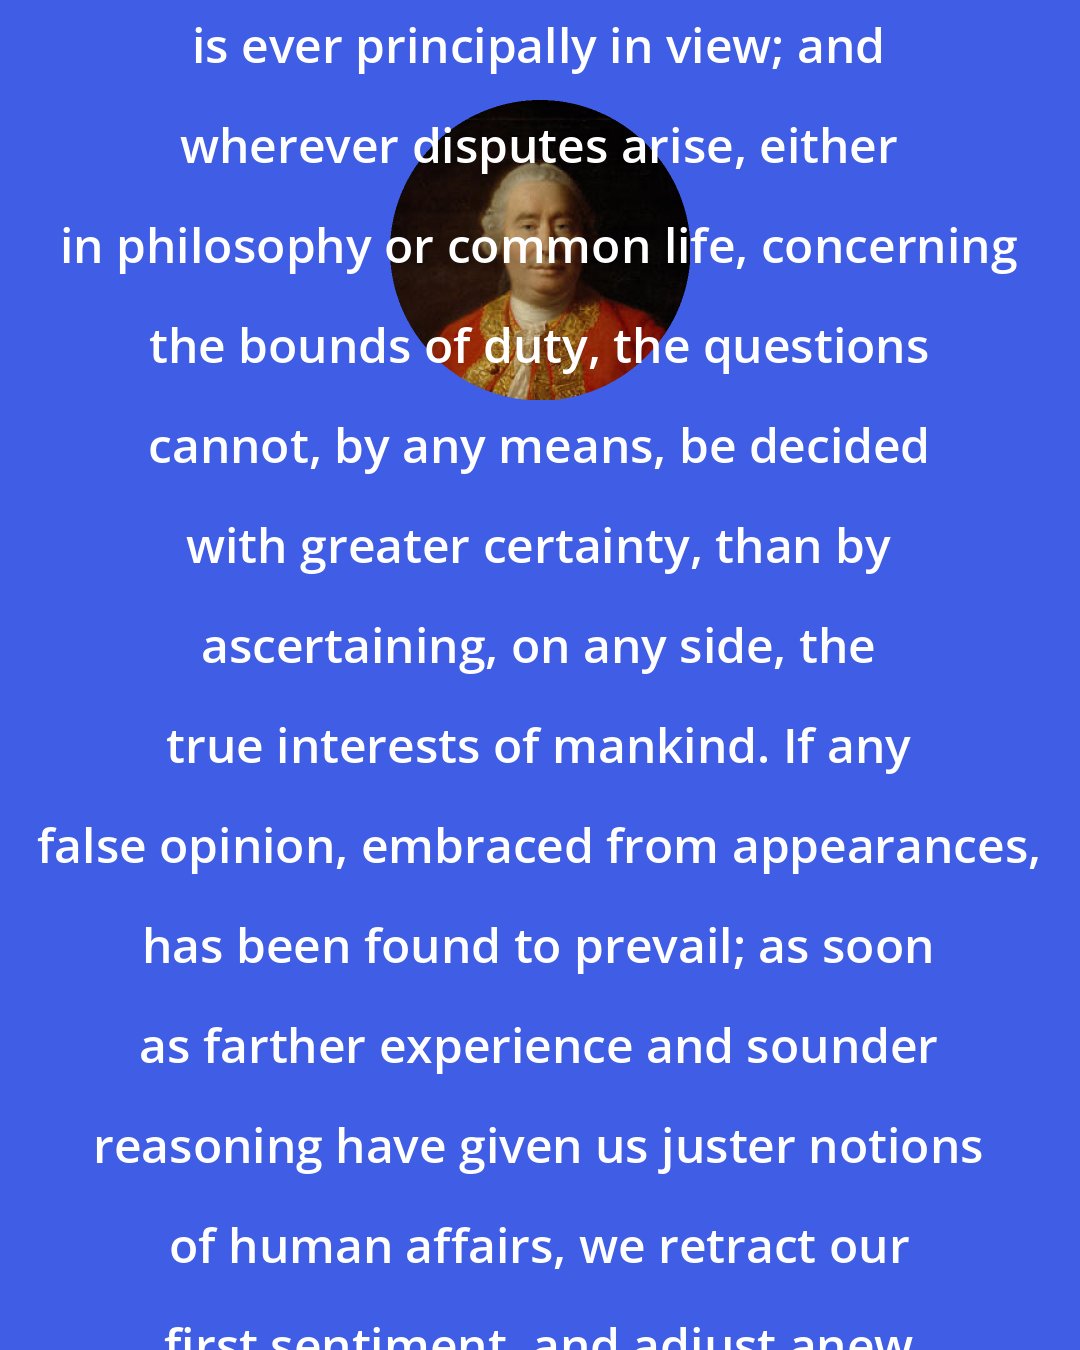 David Hume: In all determinations of morality, this circumstance of public utility is ever principally in view; and wherever disputes arise, either in philosophy or common life, concerning the bounds of duty, the questions cannot, by any means, be decided with greater certainty, than by ascertaining, on any side, the true interests of mankind. If any false opinion, embraced from appearances, has been found to prevail; as soon as farther experience and sounder reasoning have given us juster notions of human affairs, we retract our first sentiment, and adjust anew the boundaries of moral good and evil.